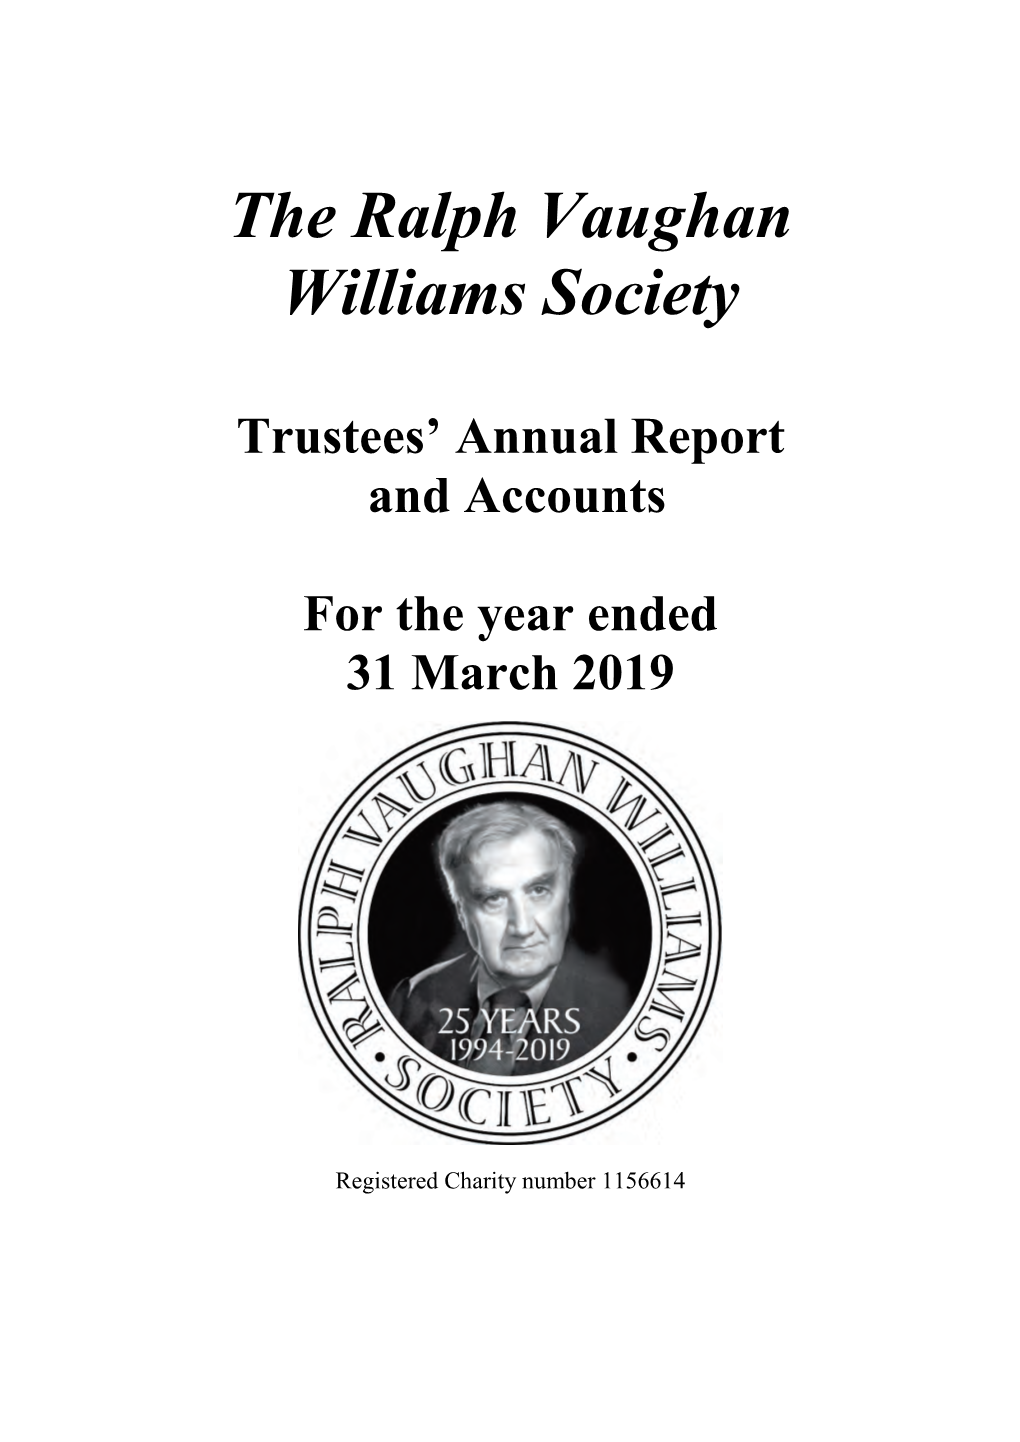 The Ralph Vaughan Williams Society Trustees' Report